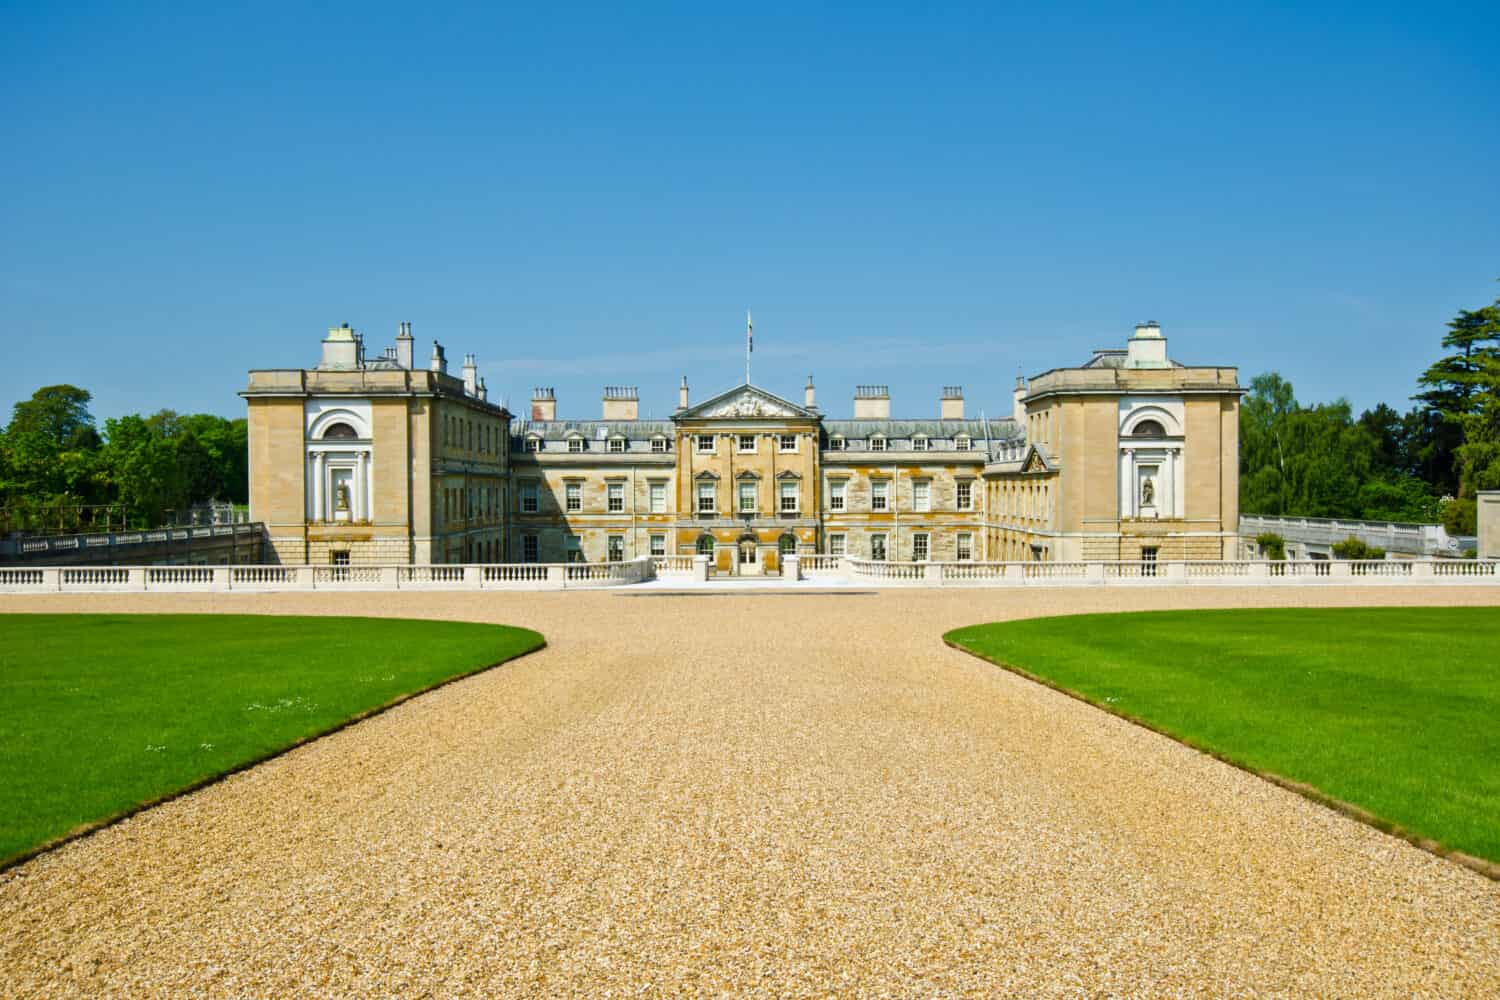 Woburn Abbey is the home of the Dukes of Bedford